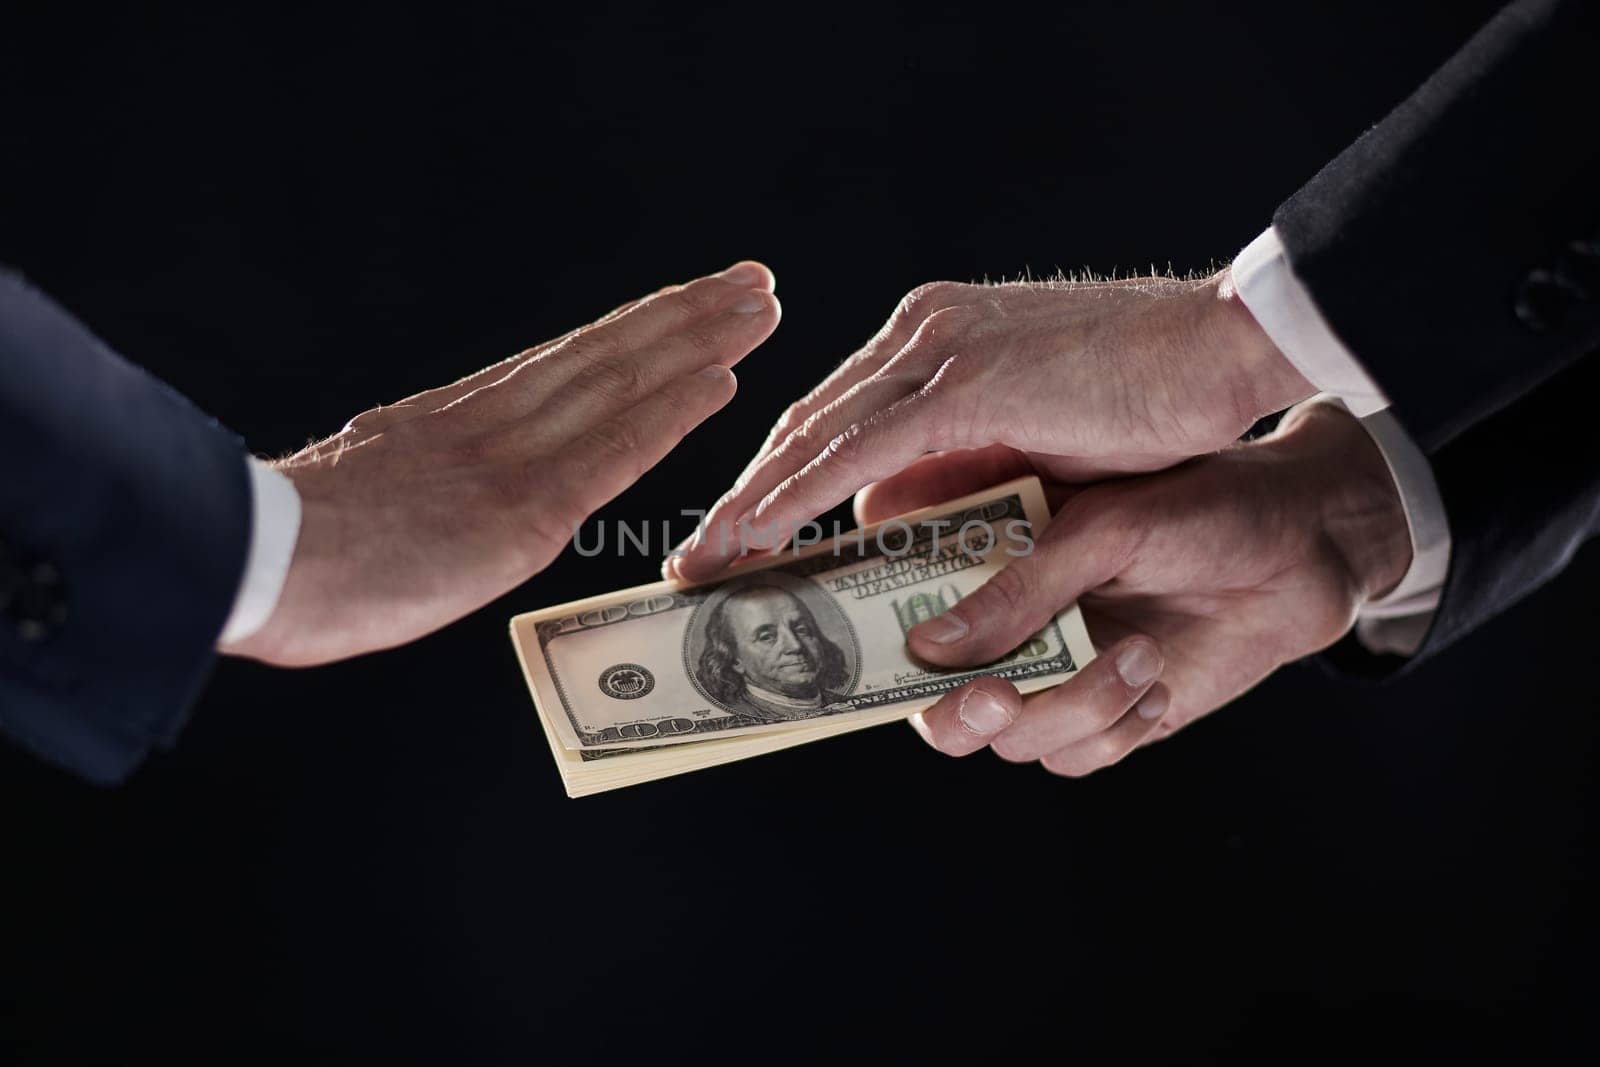 A man's hand in a black suit holds out a wad of money, which refuses. On a black background